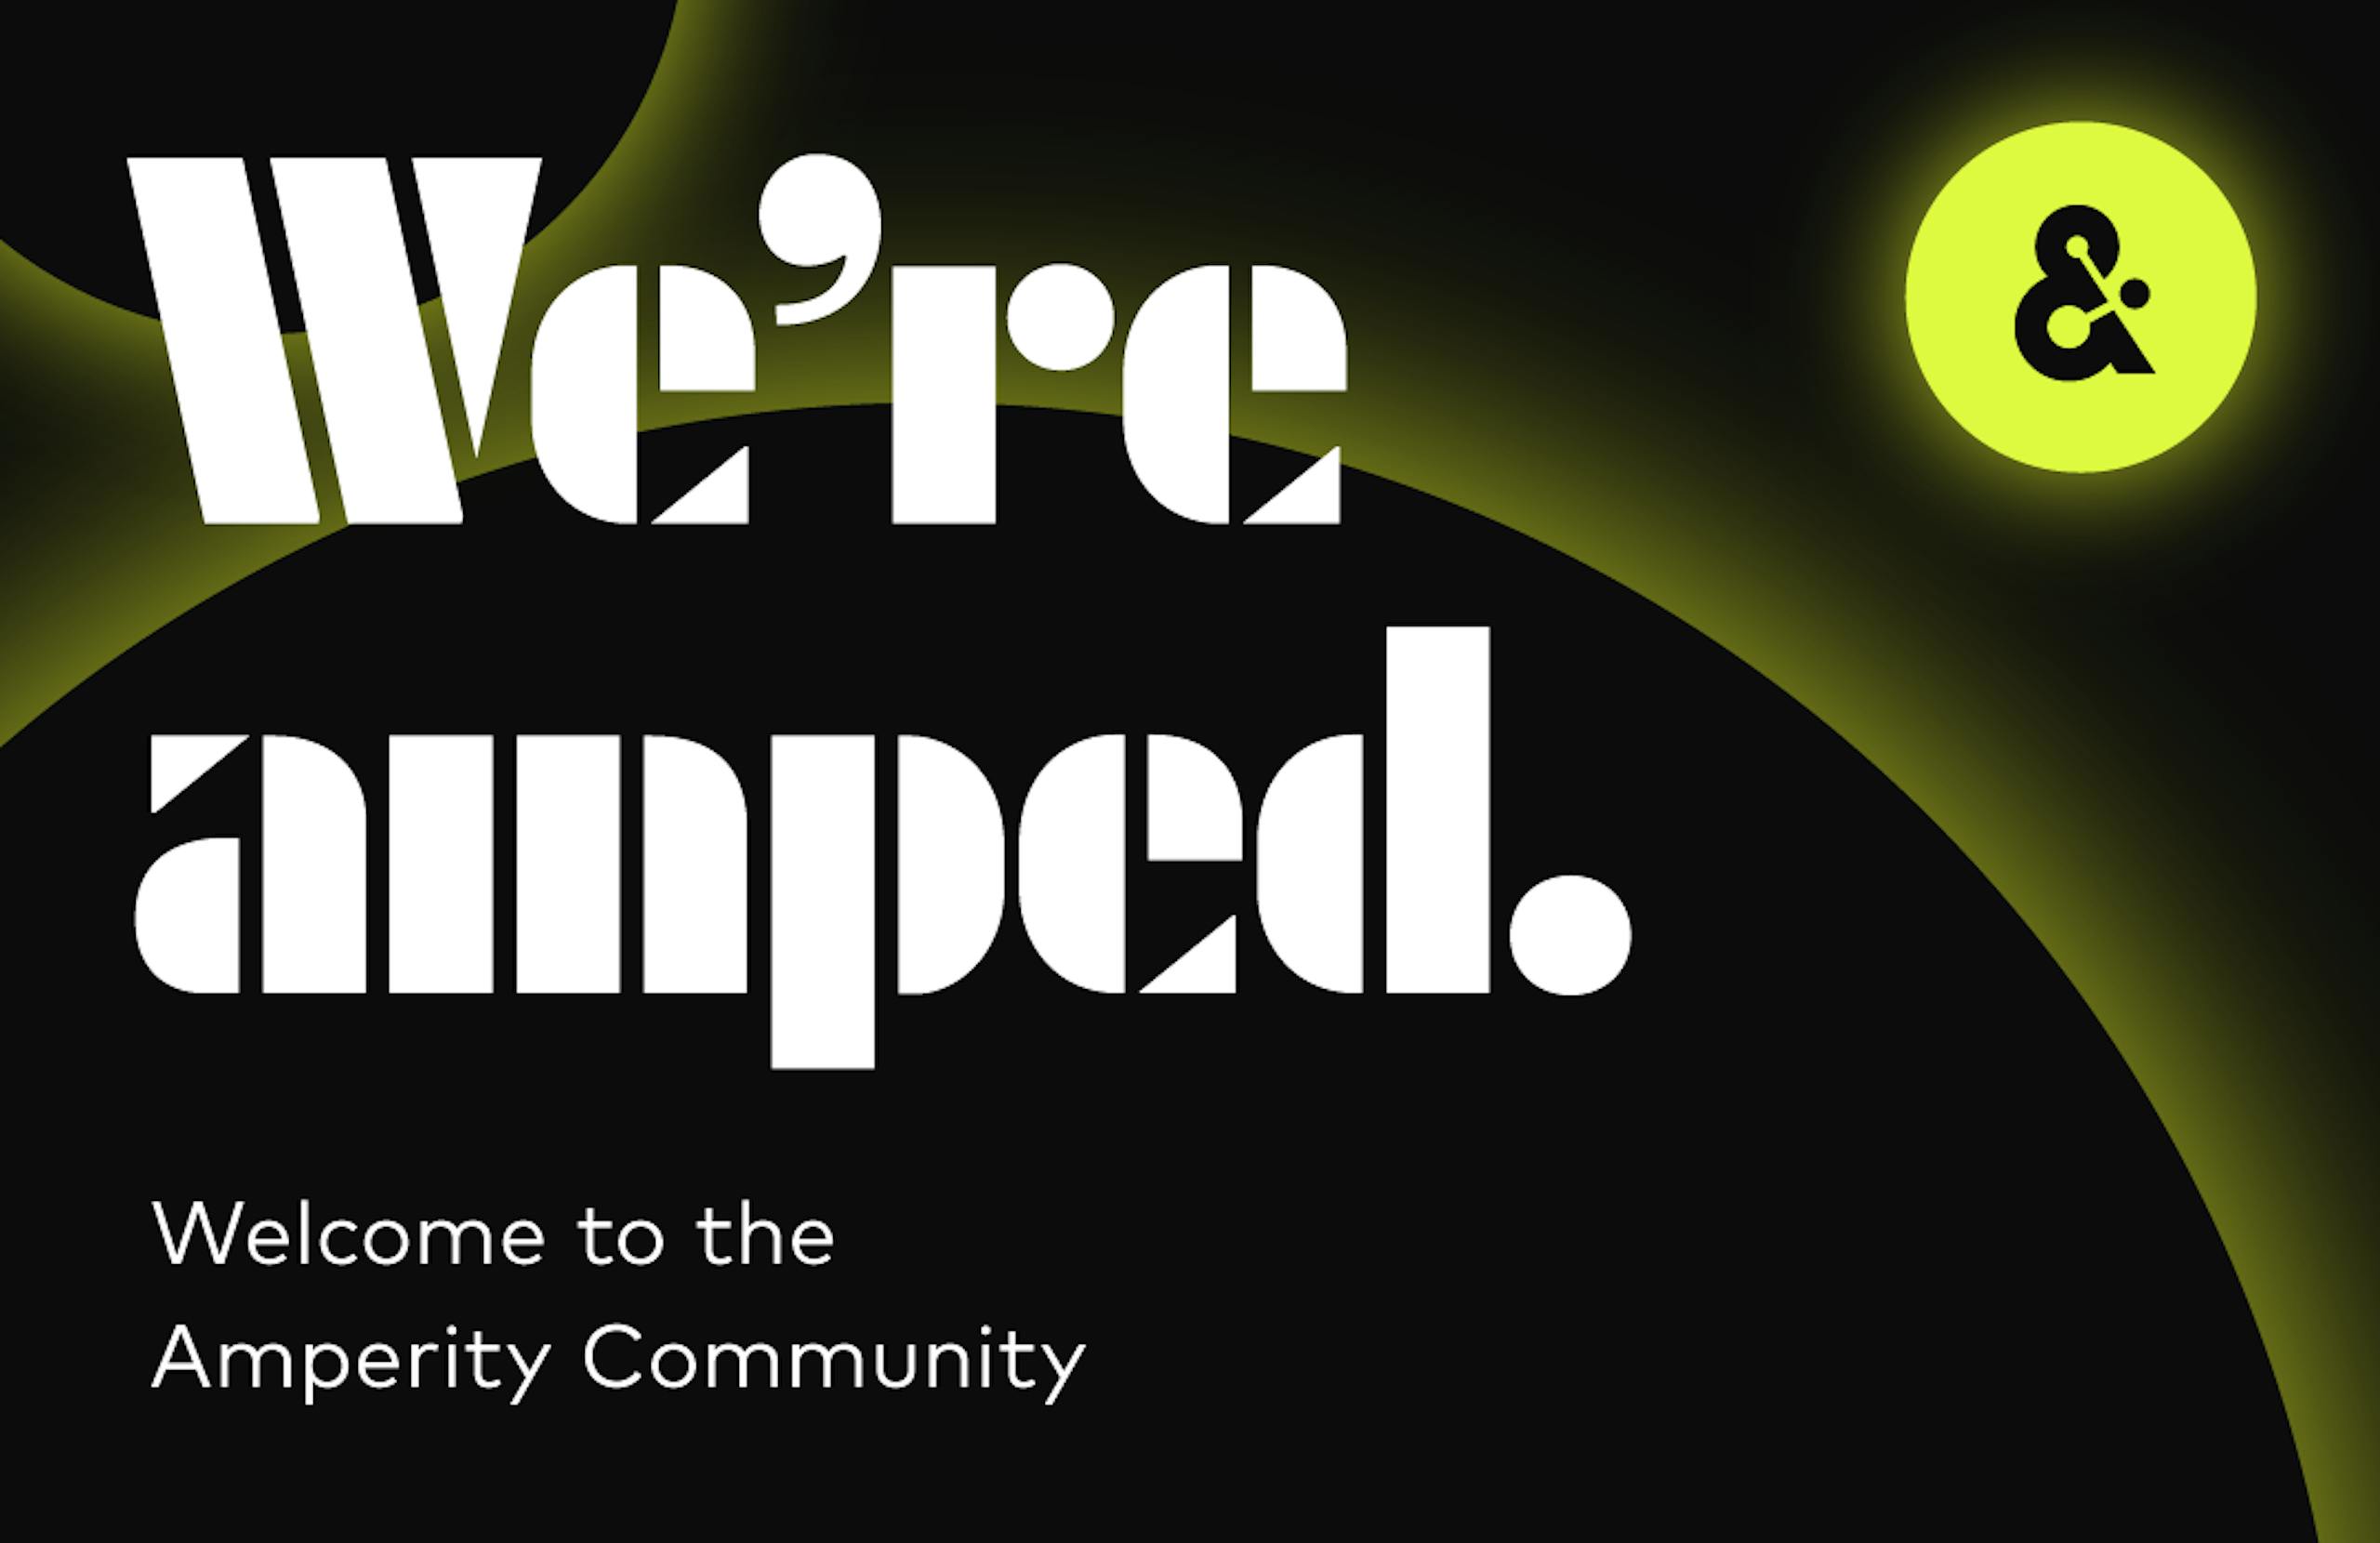 We're amped. Welcome to the Amperity Community.